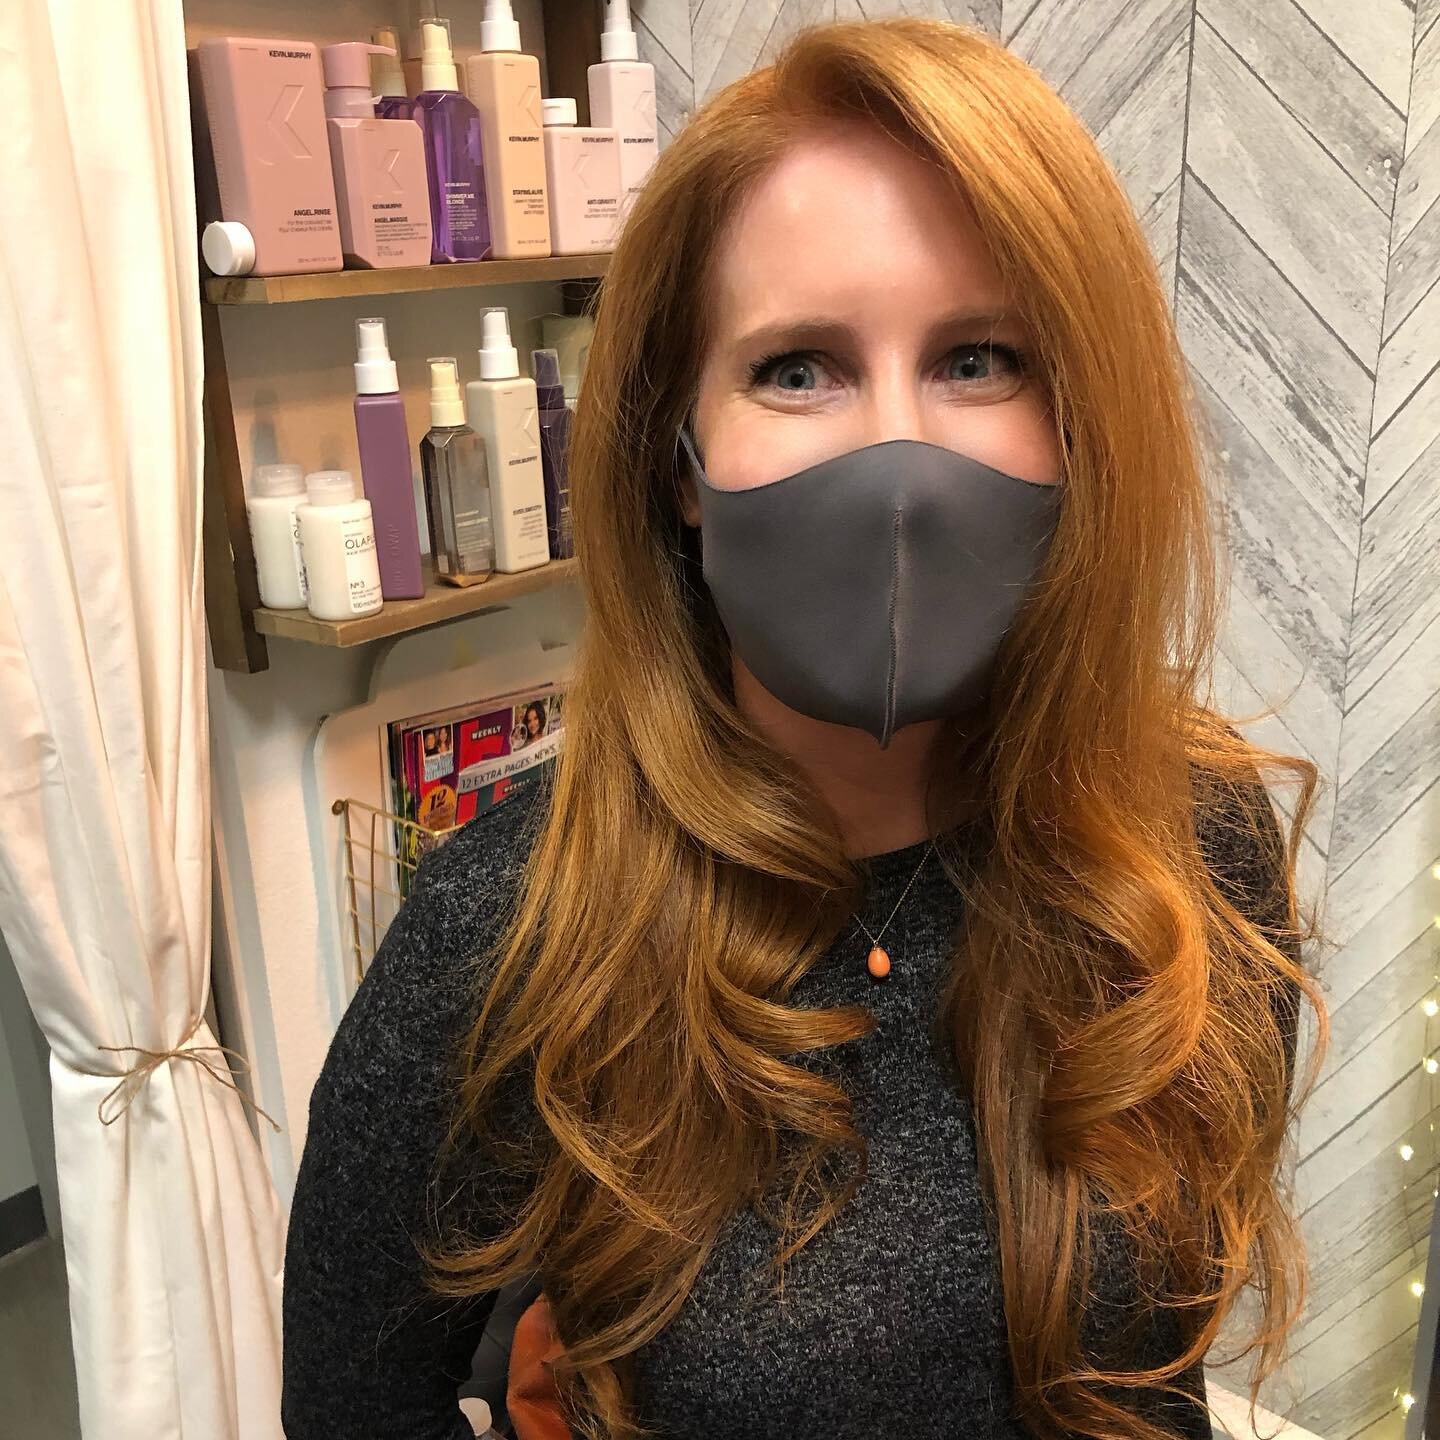 🧡Winter refresh🧡 it&rsquo;s always fun seeing this beauty. We did a new growth application @kevin.murphy and refreshed her ends with @redken shades eq. We&rsquo;re obsessed with the result. 👩🏻&zwj;🦰